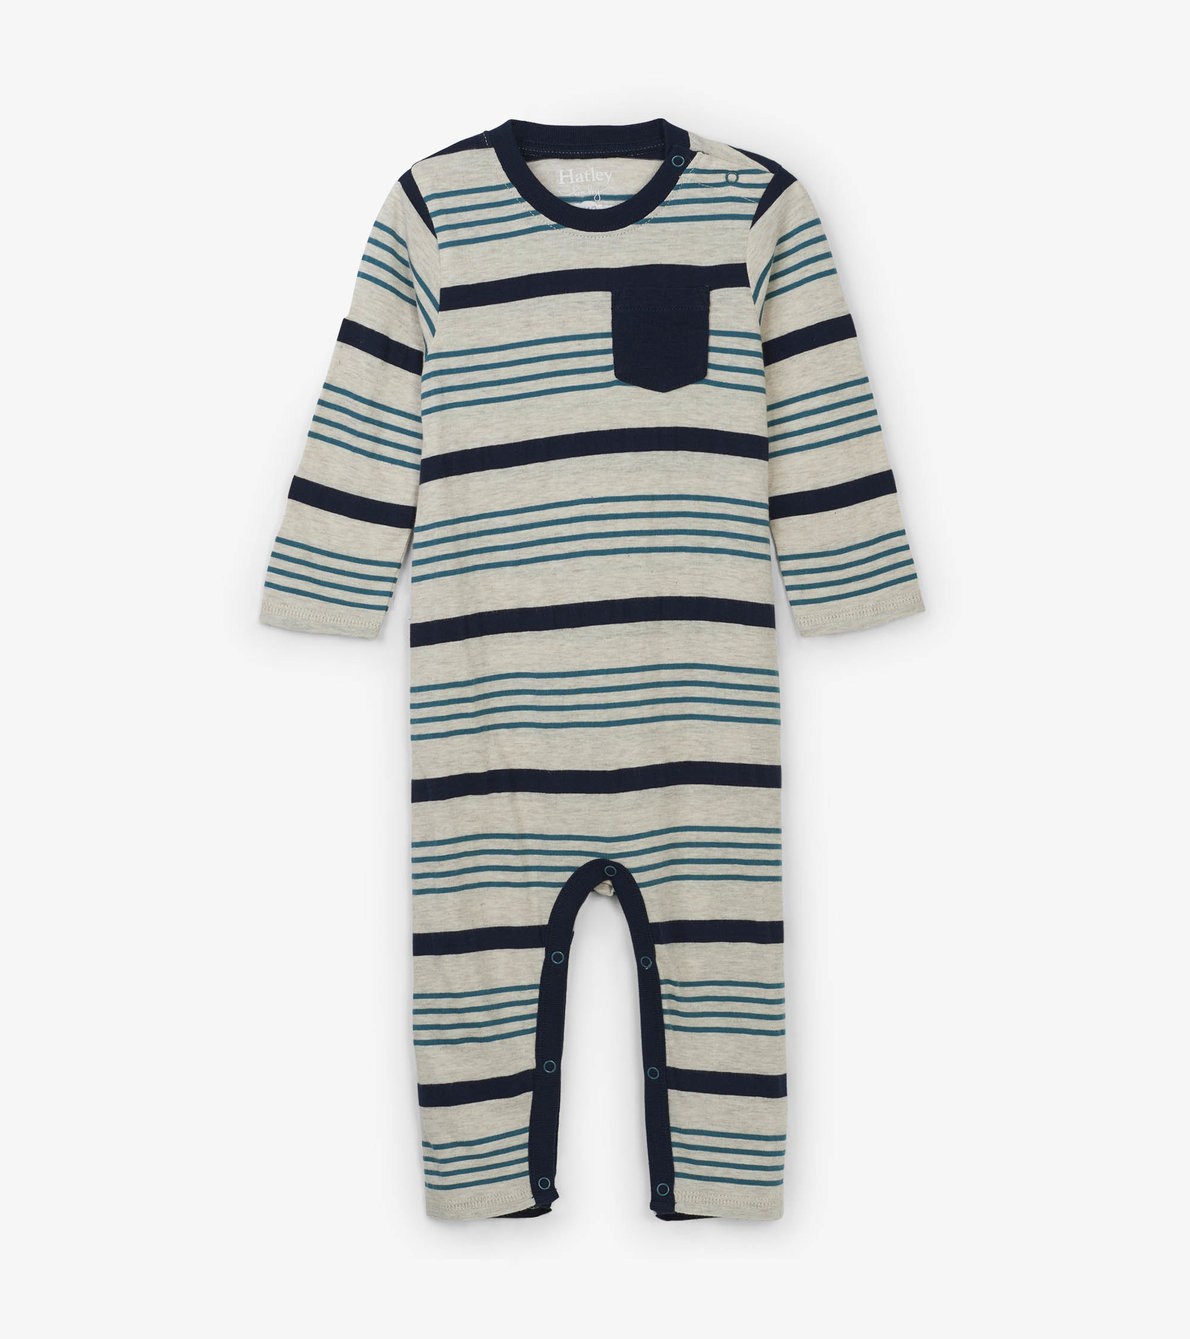 View larger image of Grey Stripe Baby Romper